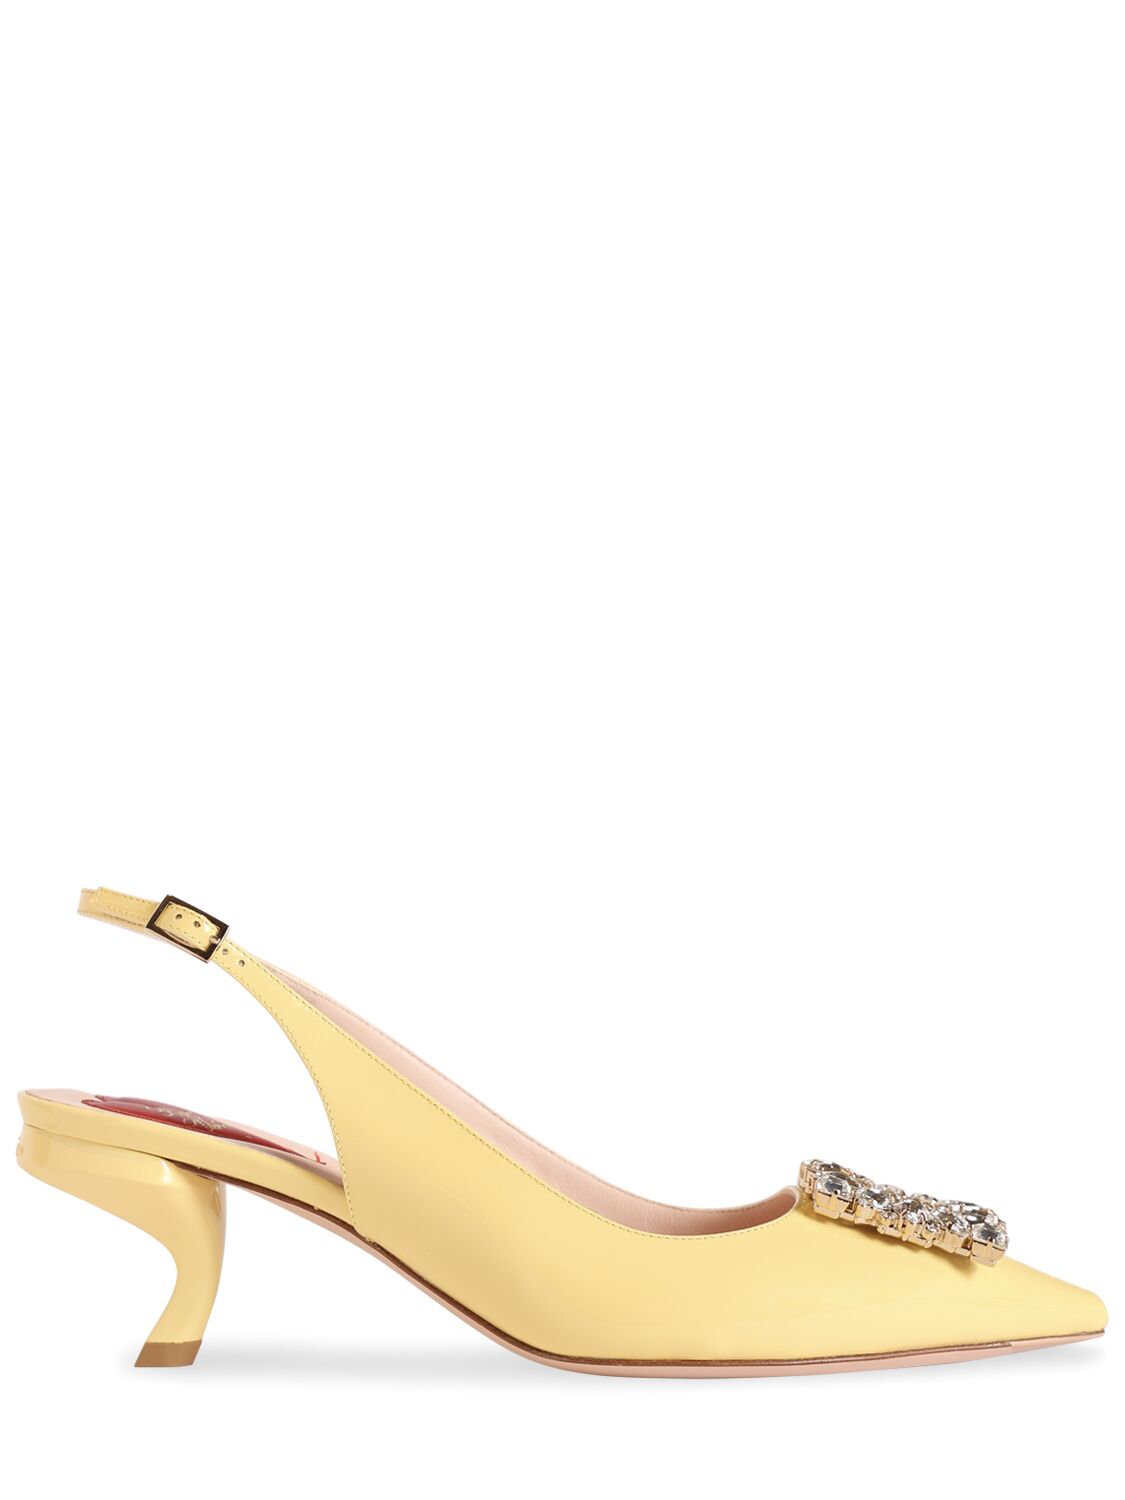 Roger Vivier 55mm Virgule Patent Leather Pumps In Yellow